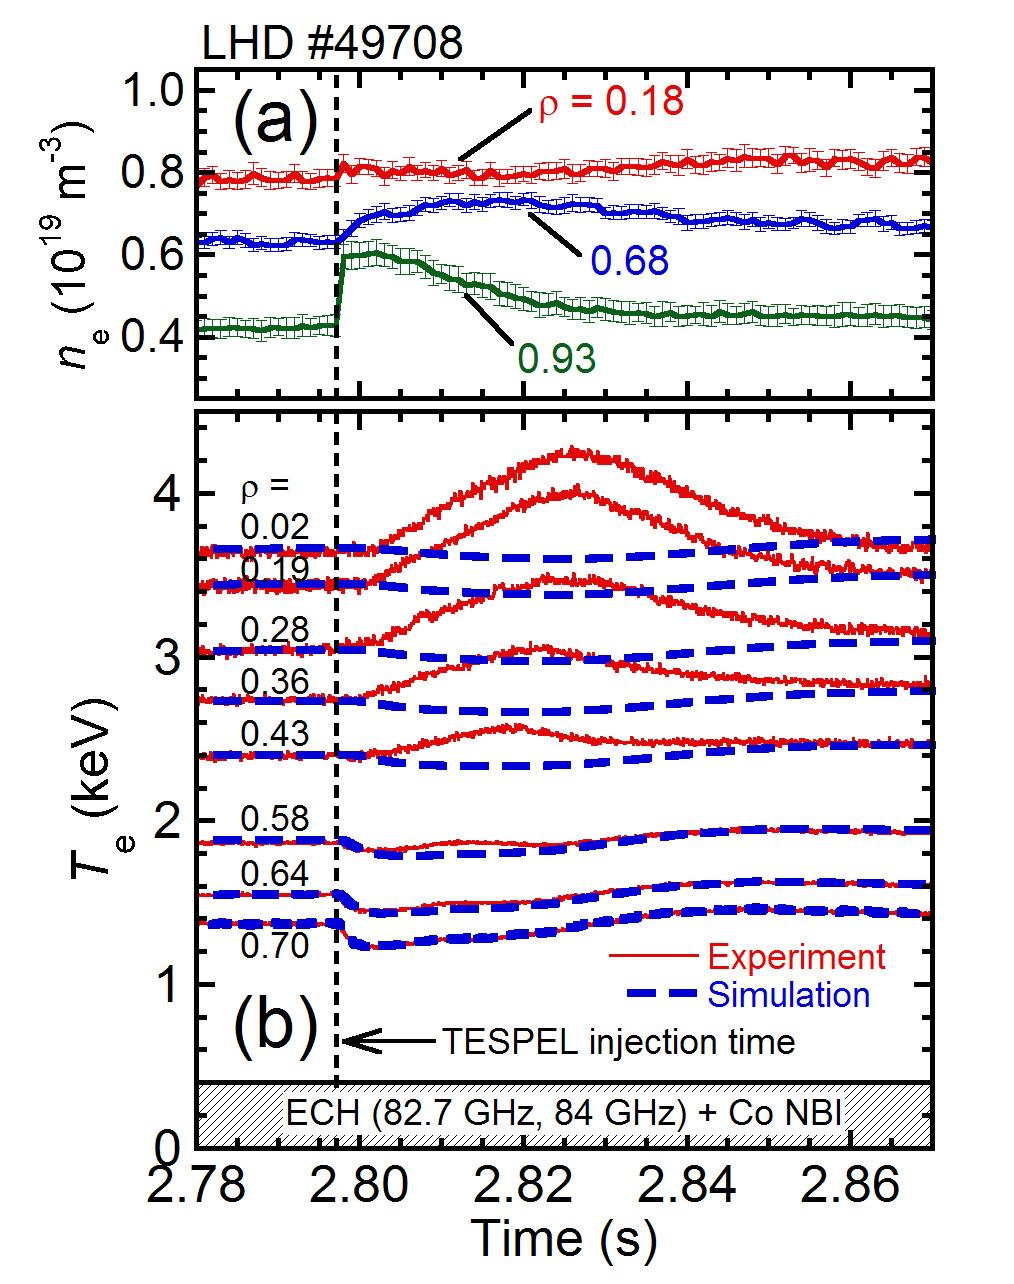 around 400 μm to 900 μm, and tracer particles as an inner core.